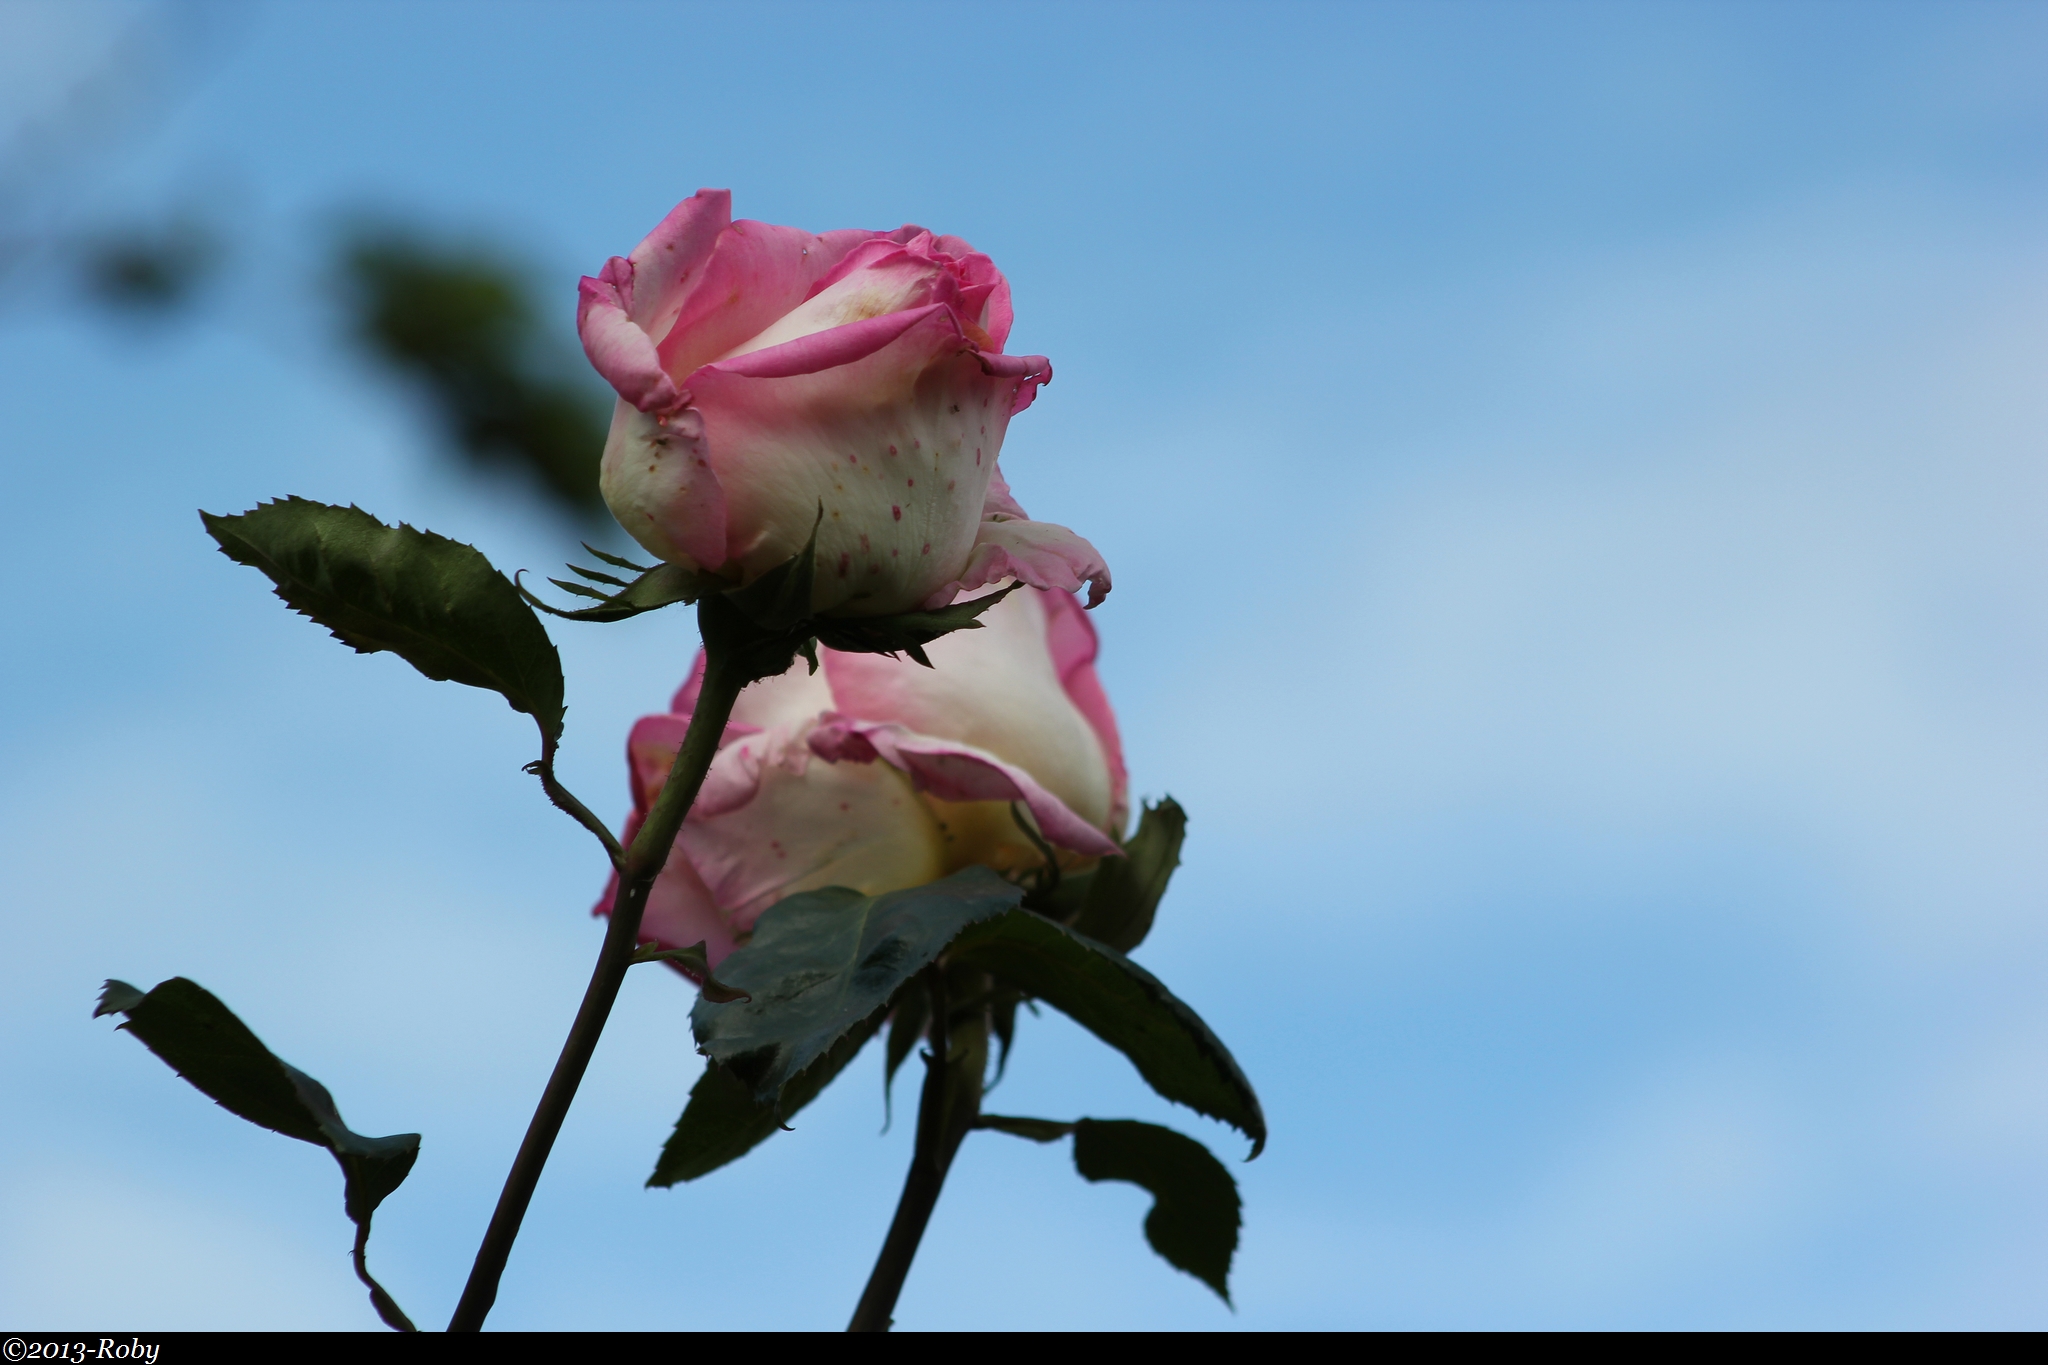 Roses- photos 2013-Roby (1)